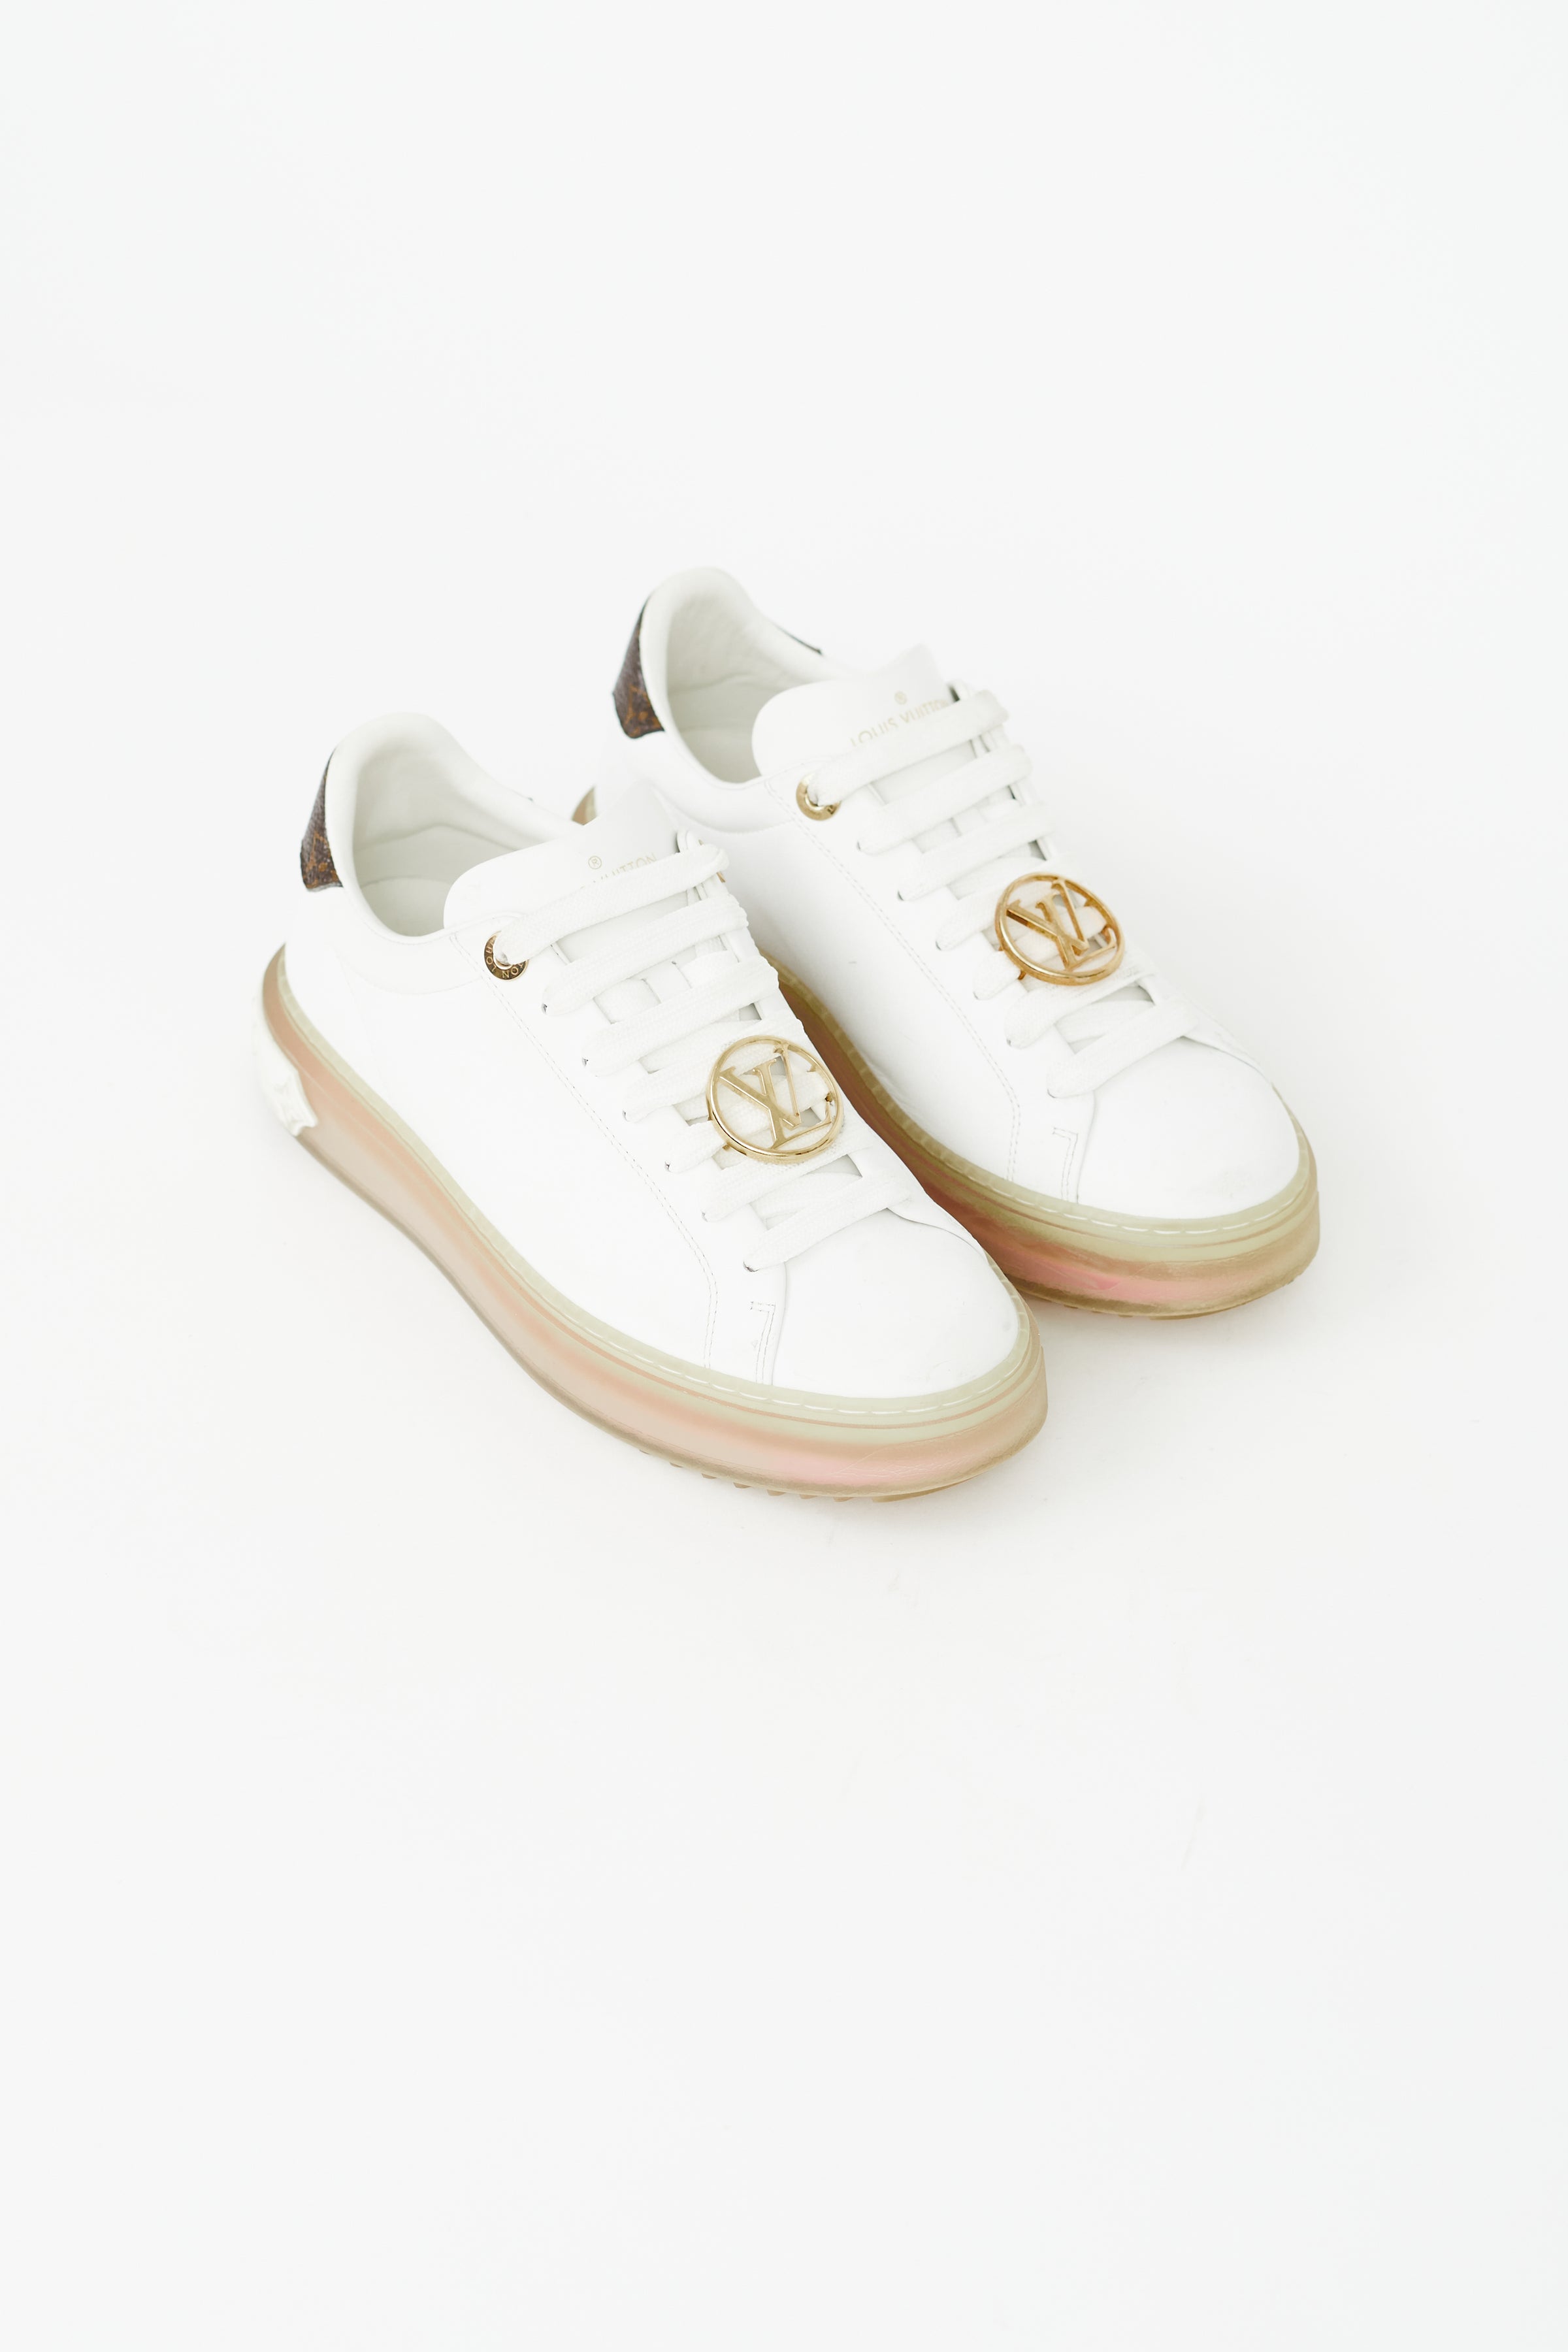 Louis Vuitton Sneakers Leather Logo LV Shoes Retro White Leather Low top  PRE OWN